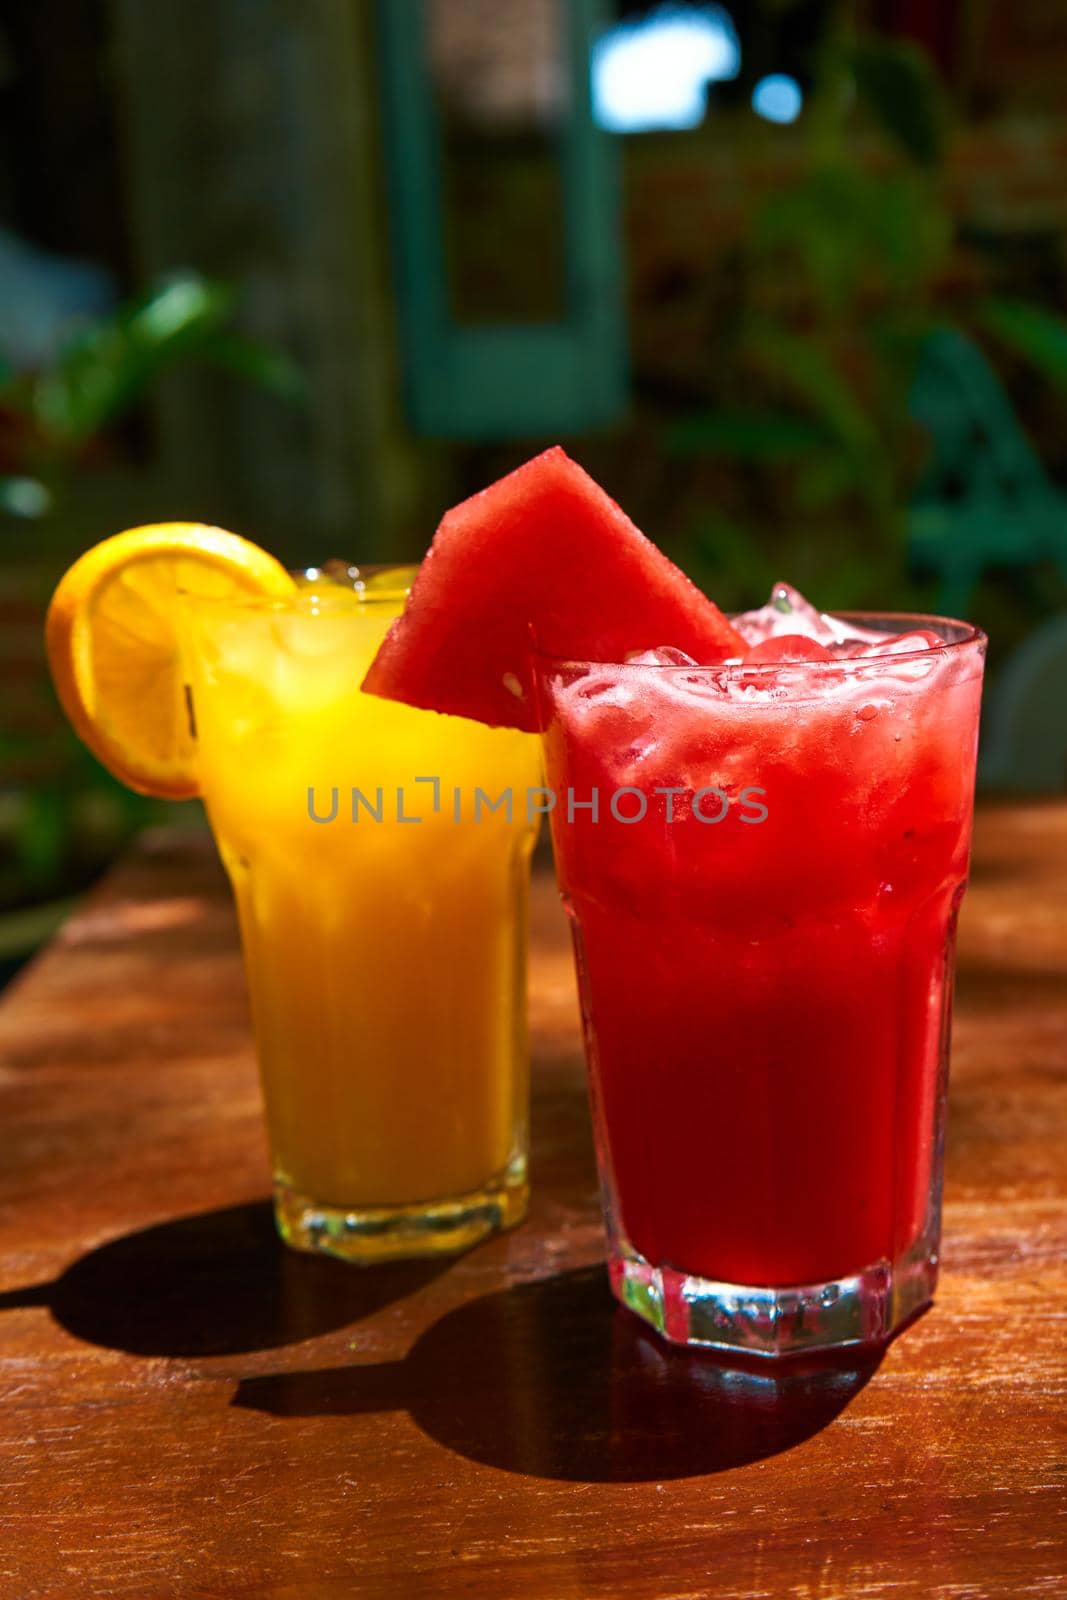 Two glass glasses with refreshing drinks from orange and watermelon juice